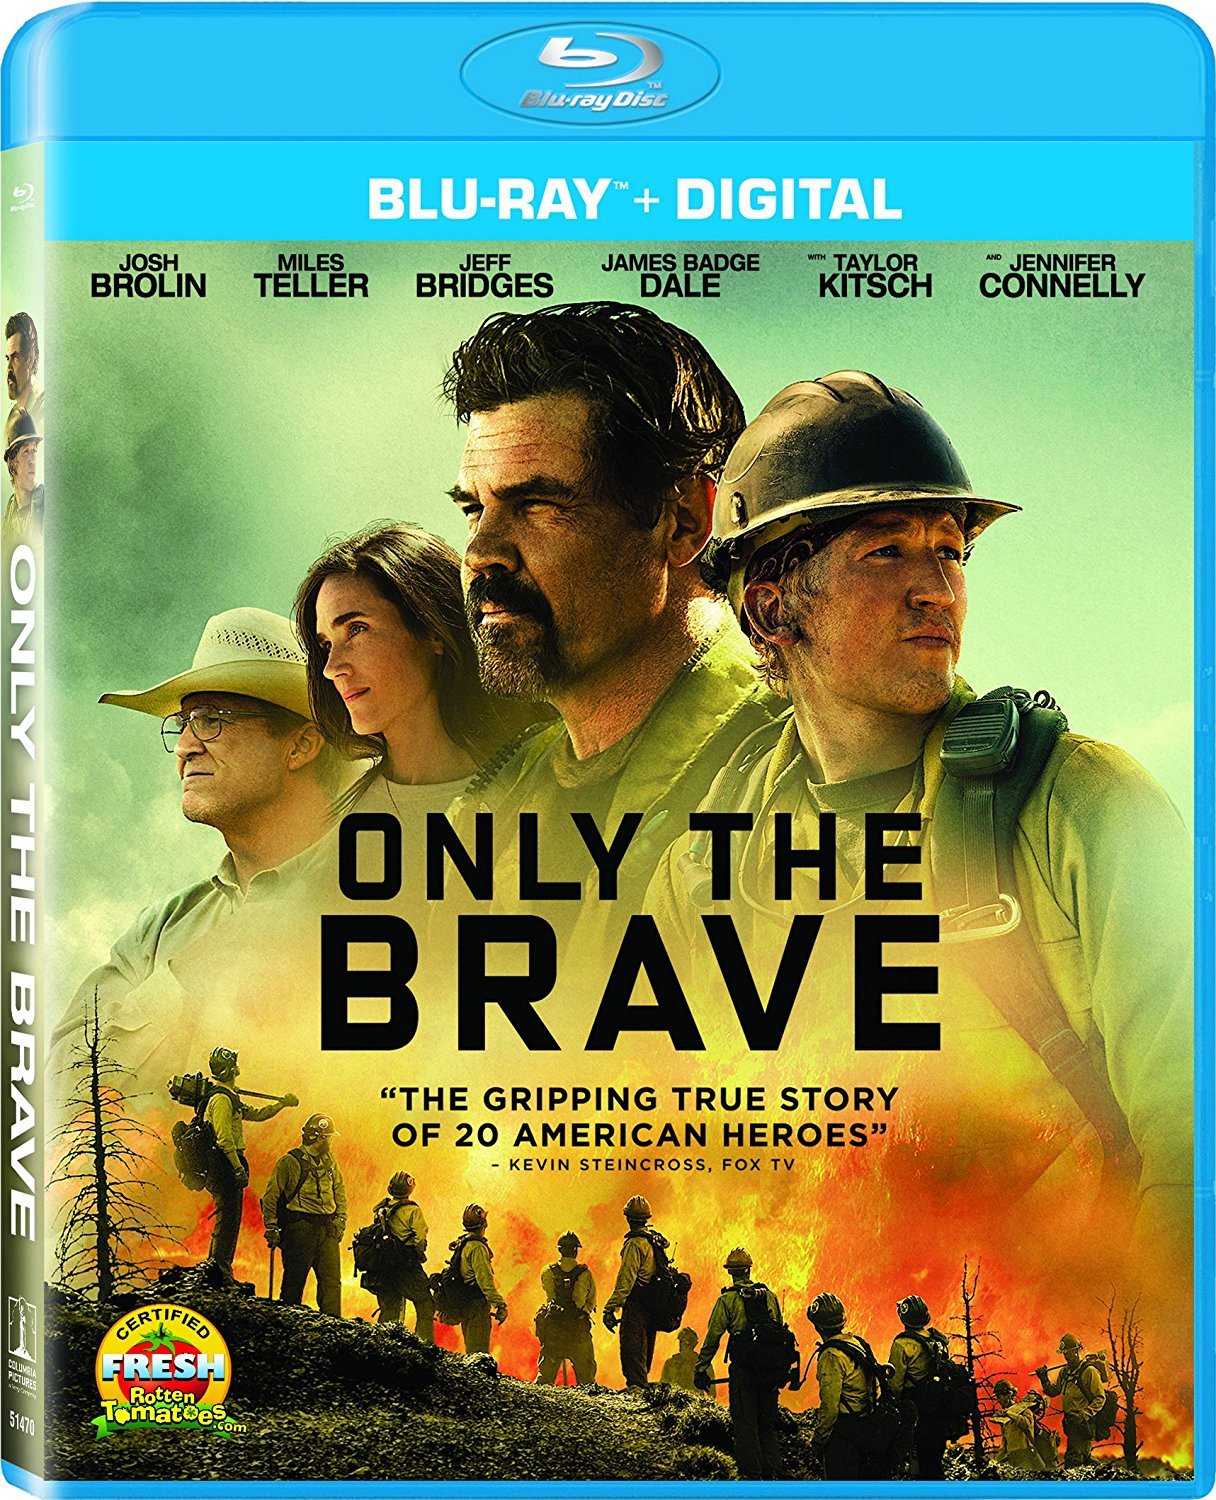 $5.34: Only the Brave (2017) [Blu-ray]